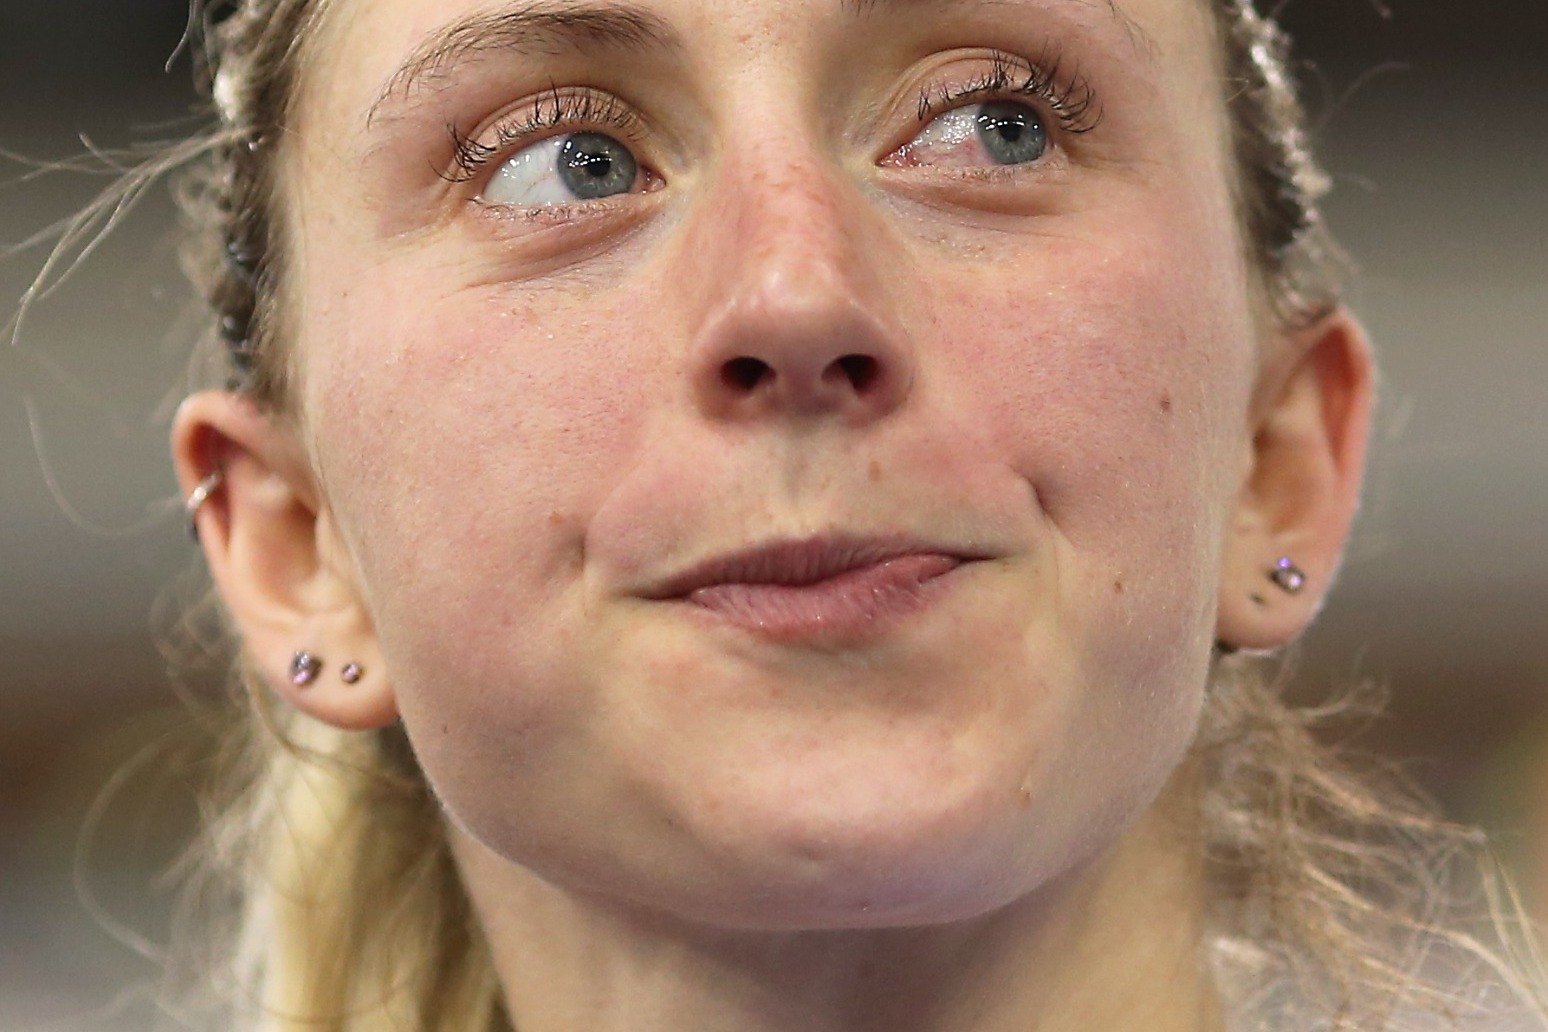 Laura Kenny endured hardest few months with miscarriage and ectopic pregnancy